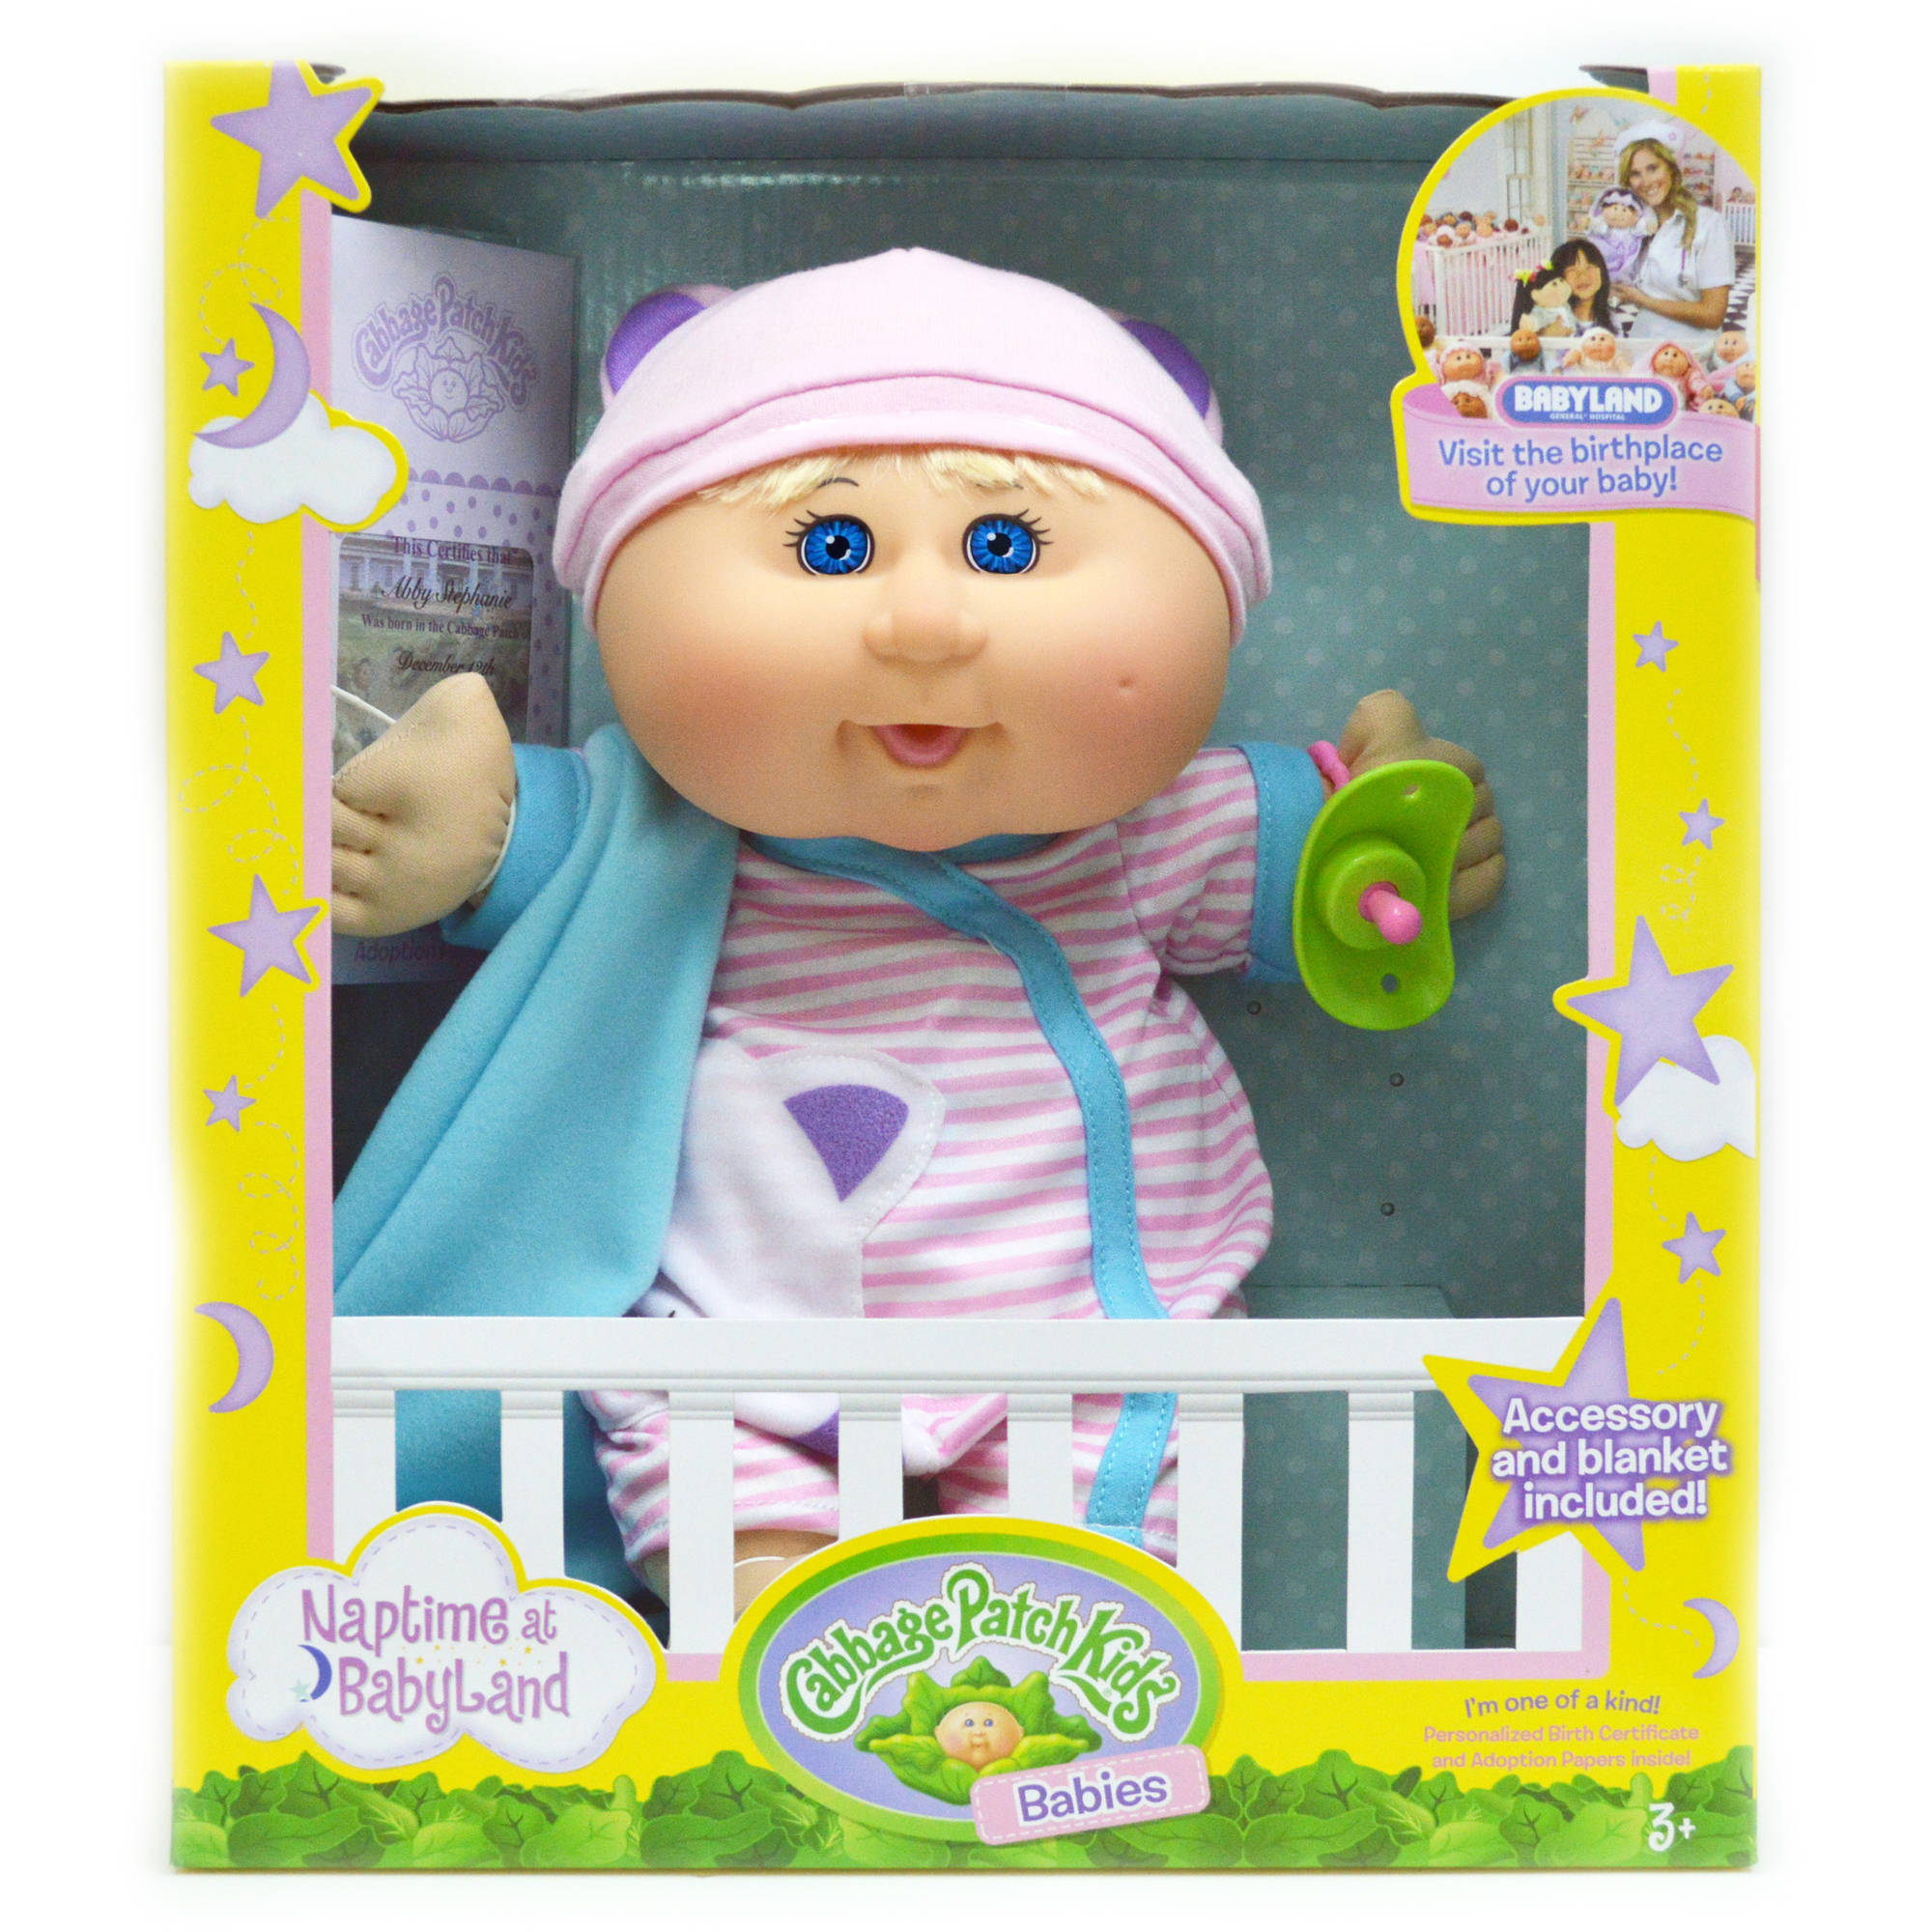 Cabbage Patch Kids Naptime Babies Doll, Bald/Blue Eye Girl - image 1 of 3